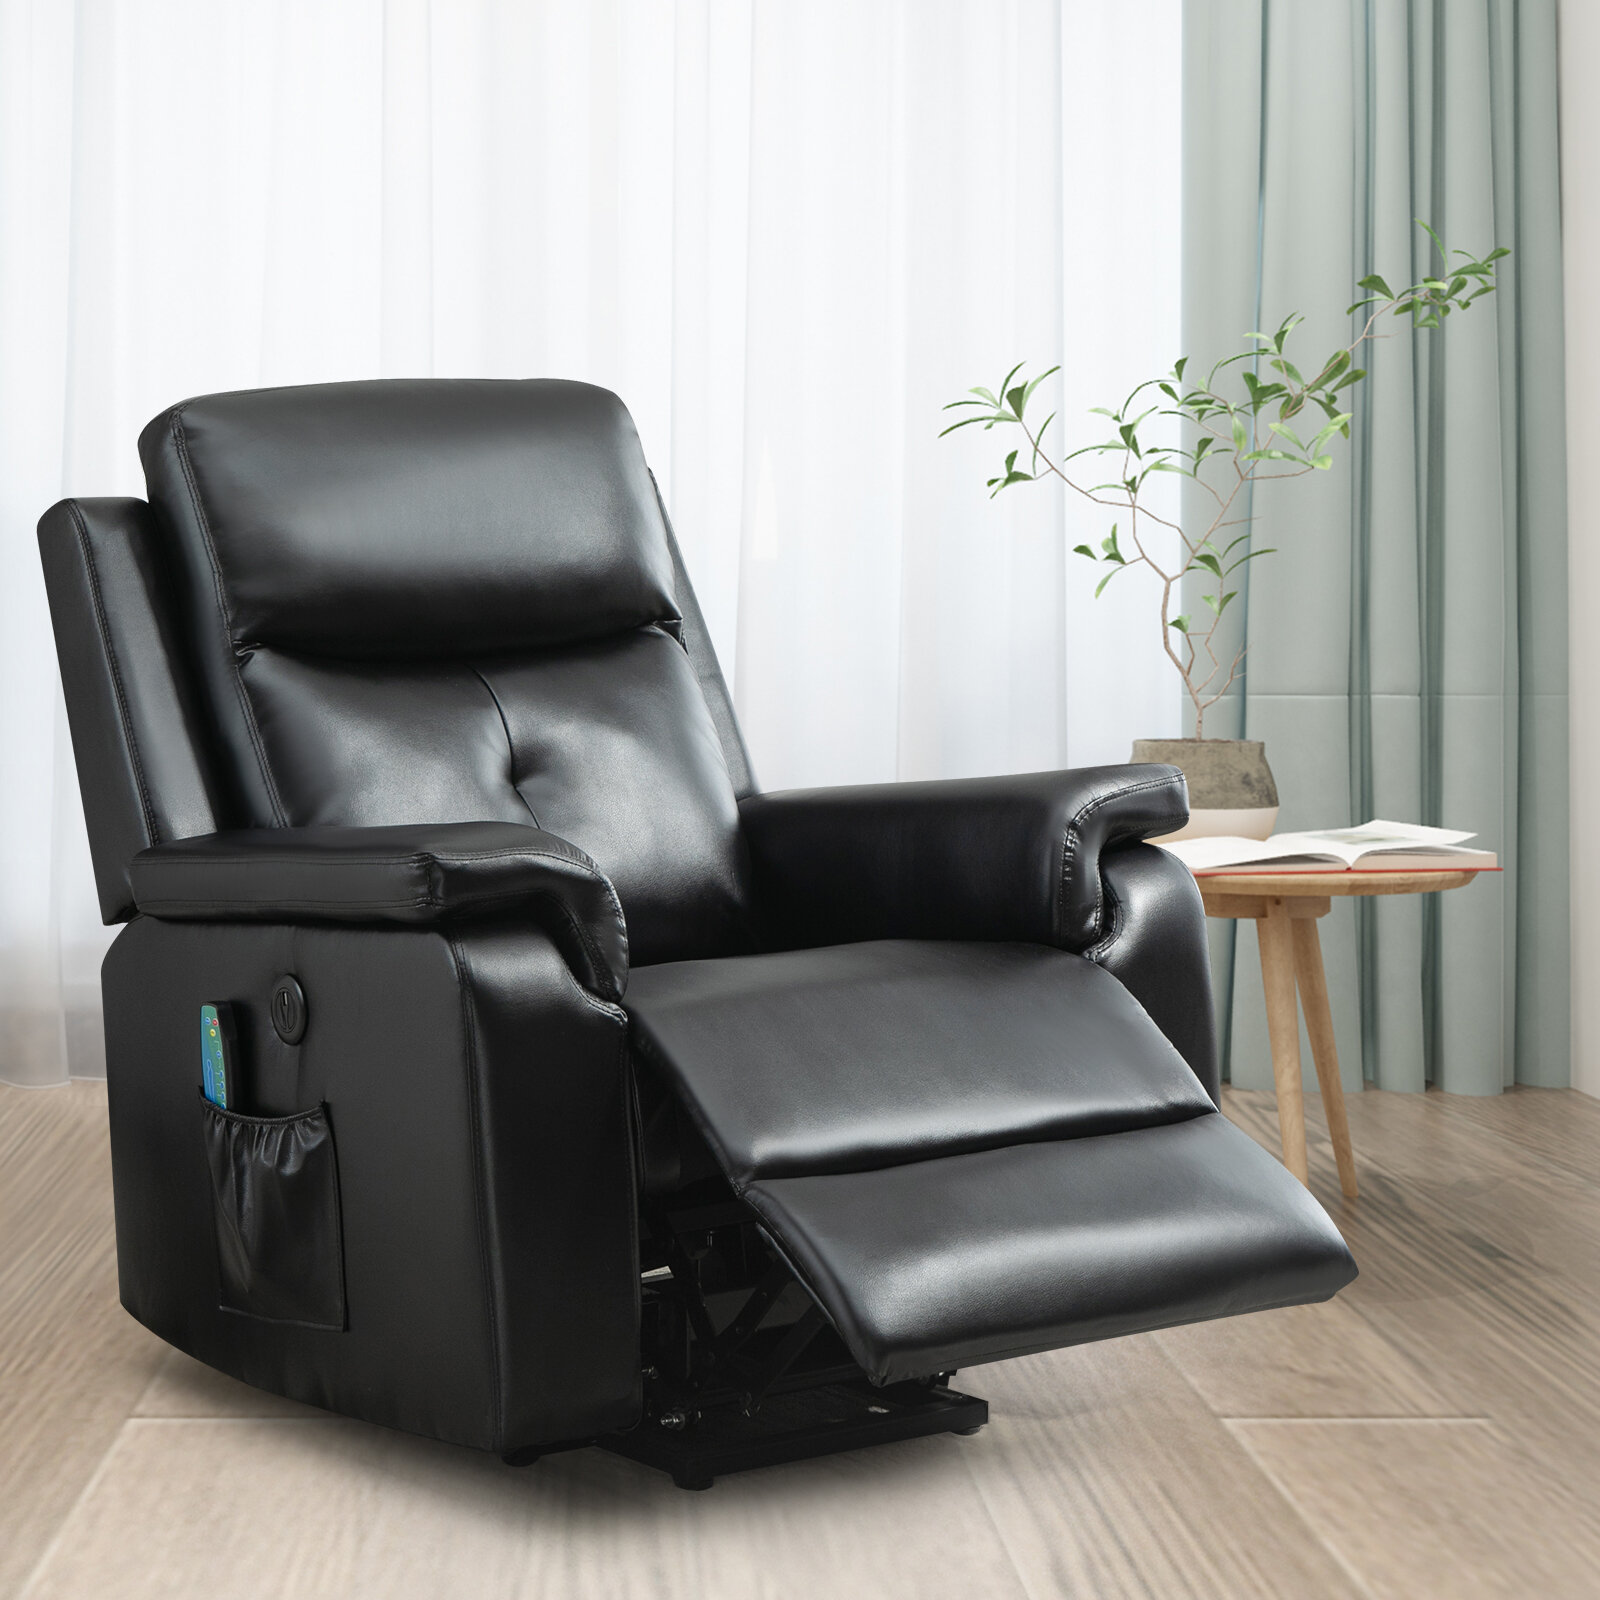 Latitude Run® Faux Leather Power Lift Recliner Chair with Massage